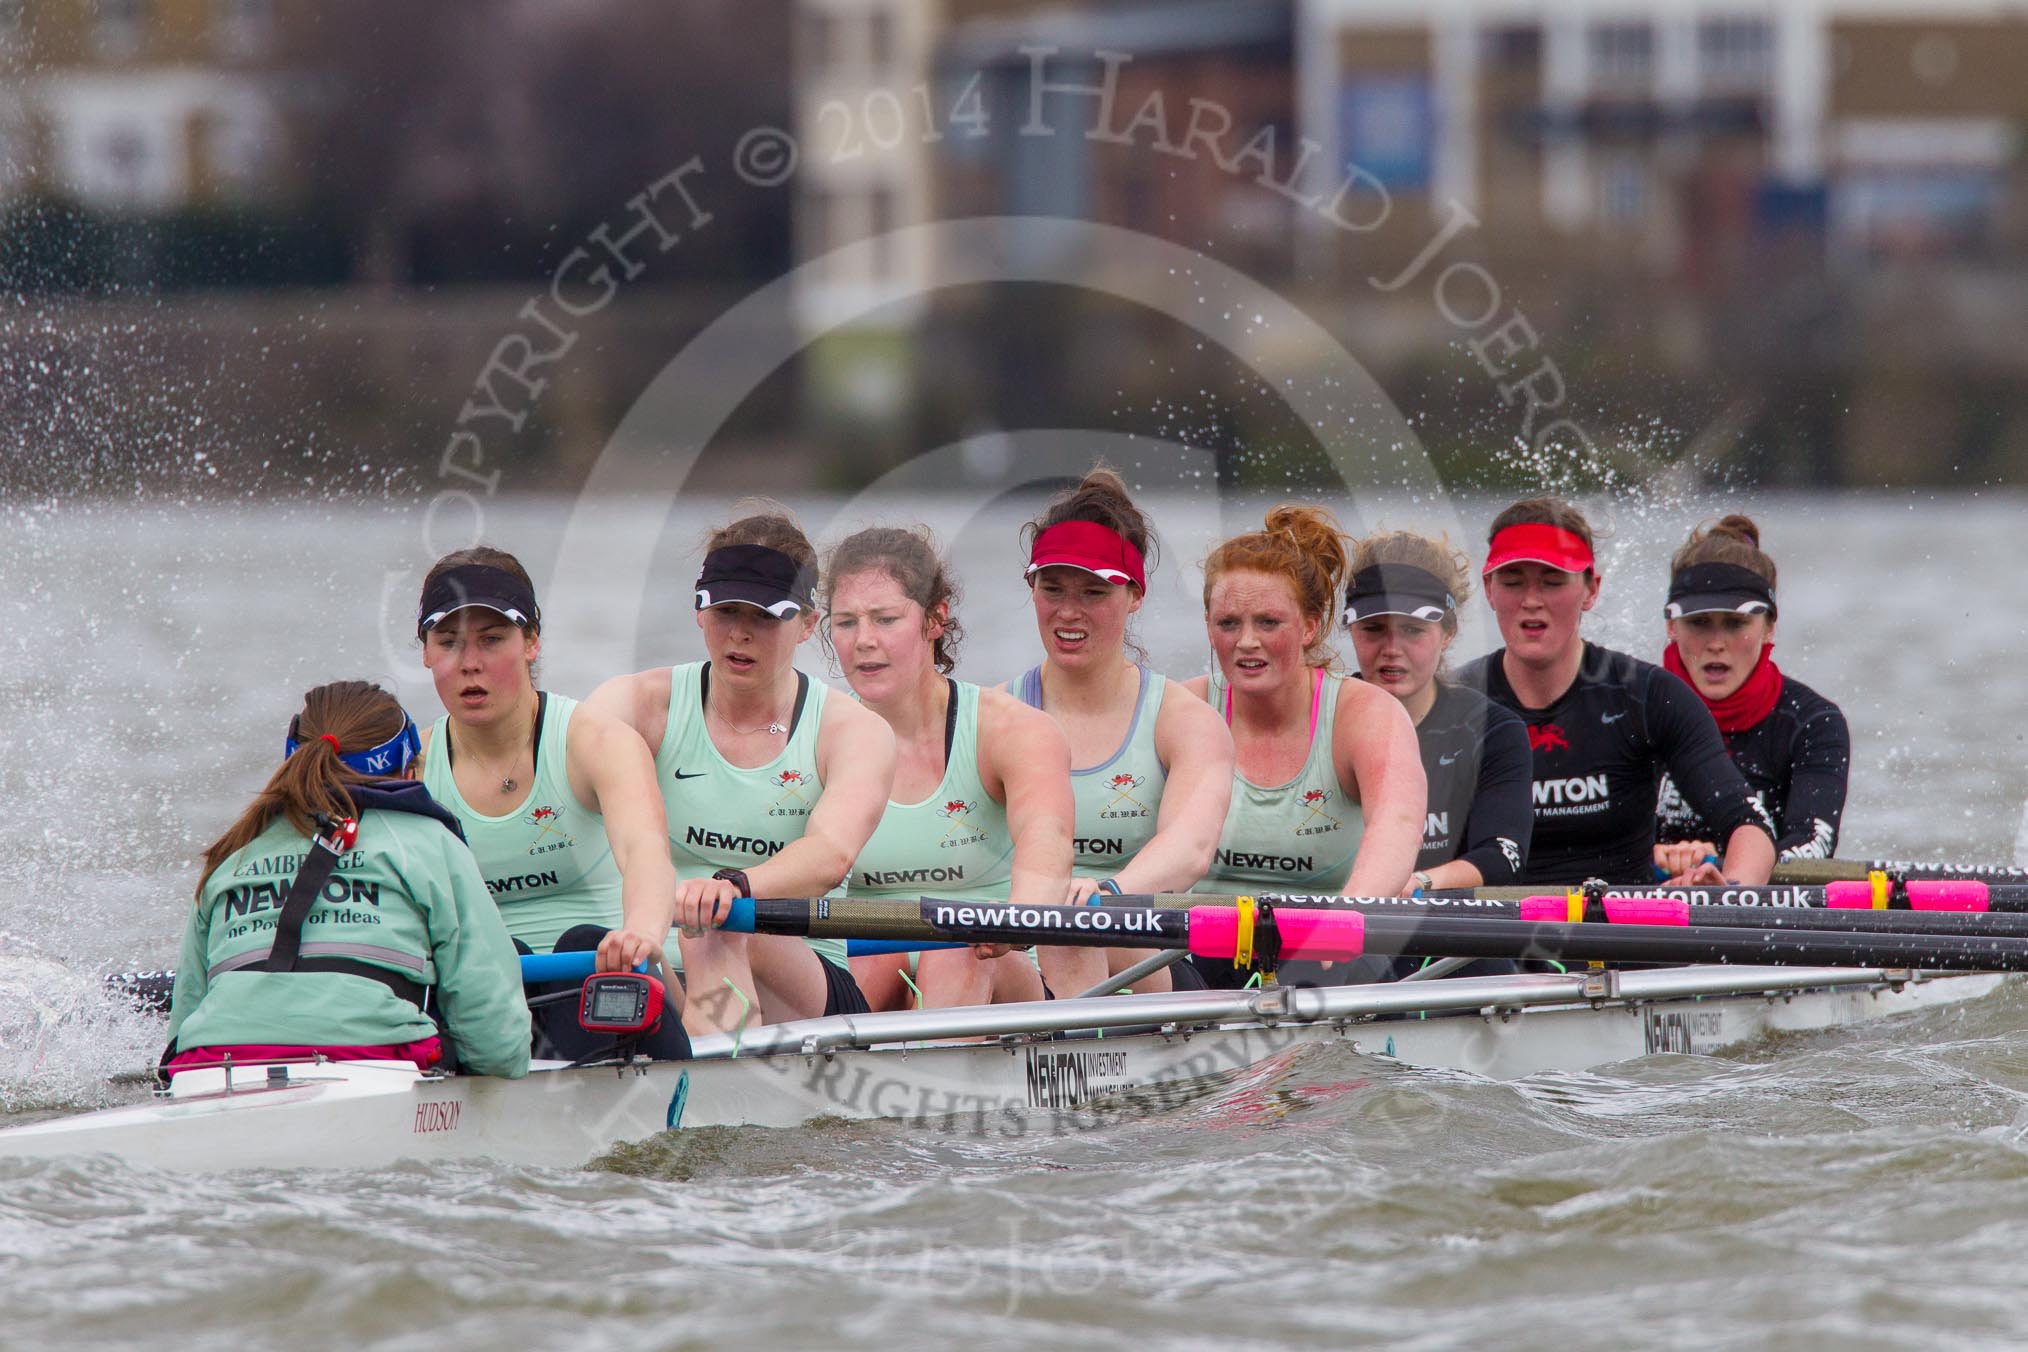 The Boat Race season 2014 - fixture CUWBC vs Thames RC: In the Thames RC boat stroke Katie O'Toole..




on 02 March 2014 at 13:15, image #106